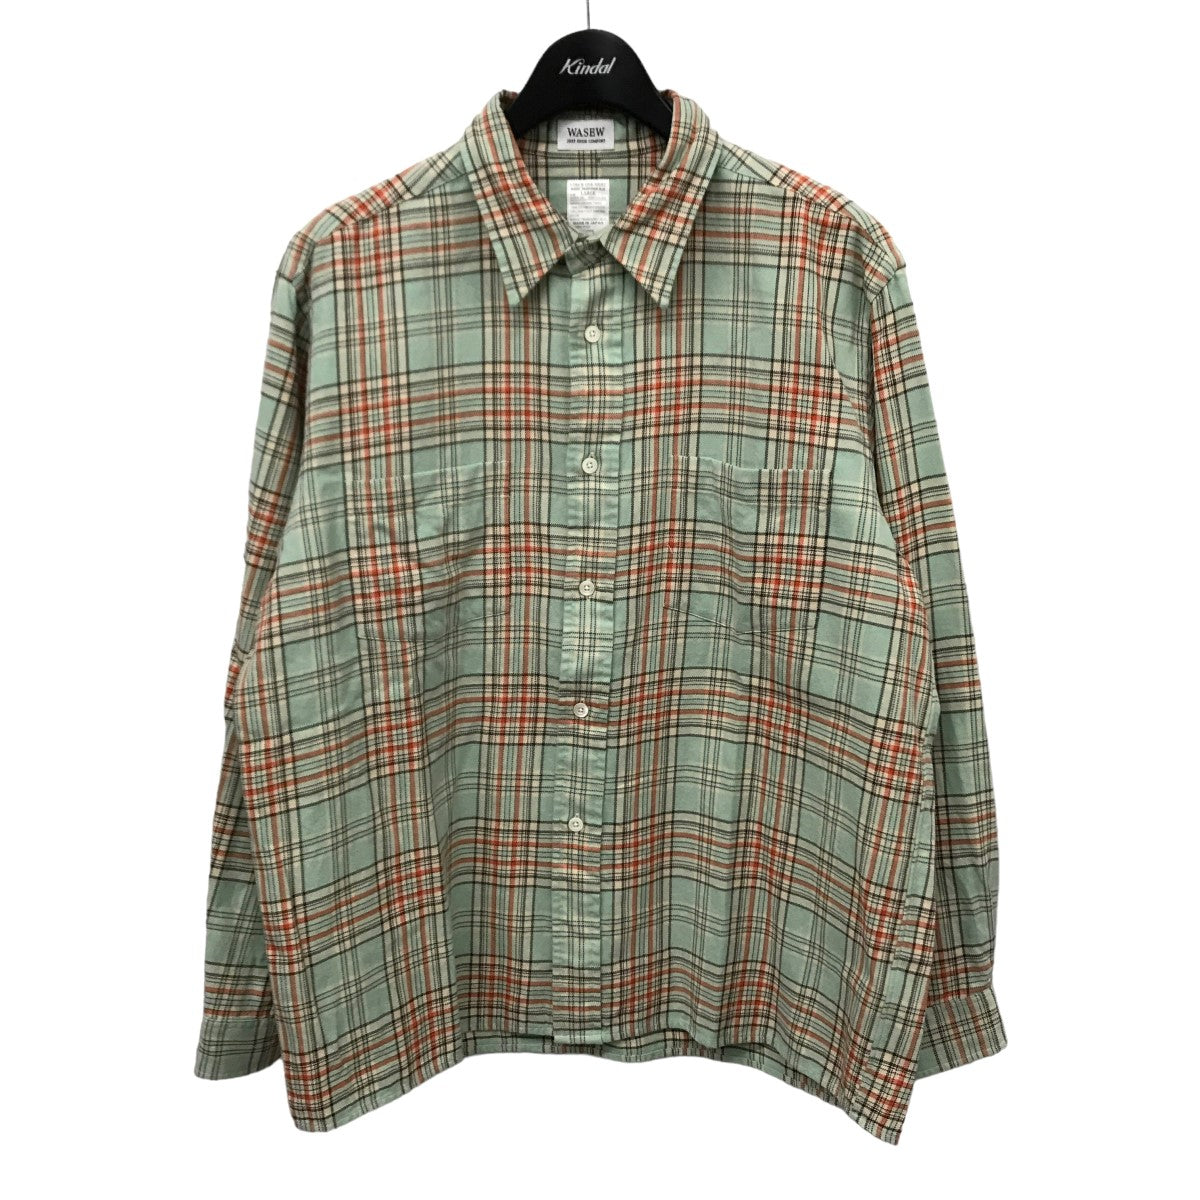 WASEW(ワソー) CHECK ONE SHIRT チェックシャツ